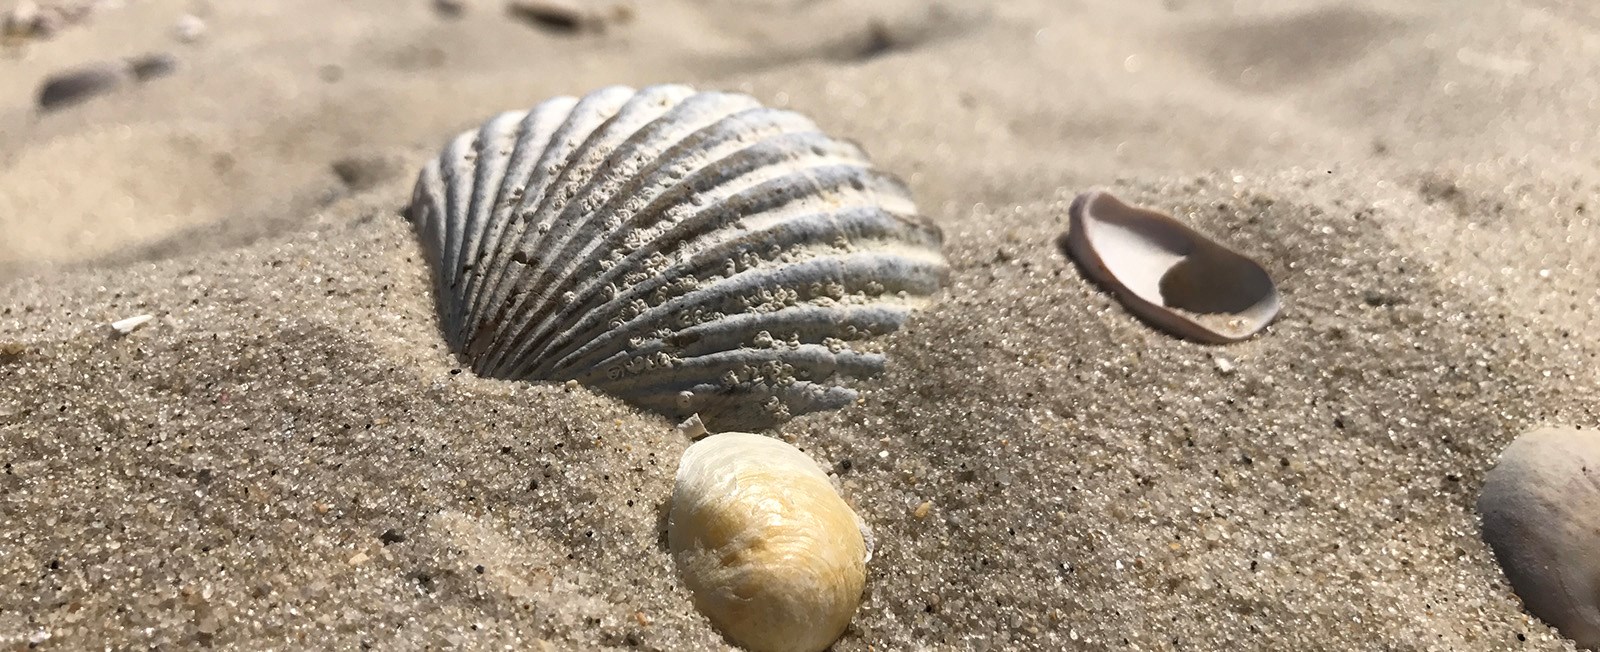 The beaches Cape and Islands are laden with all sorts of shells—how many can you identify?